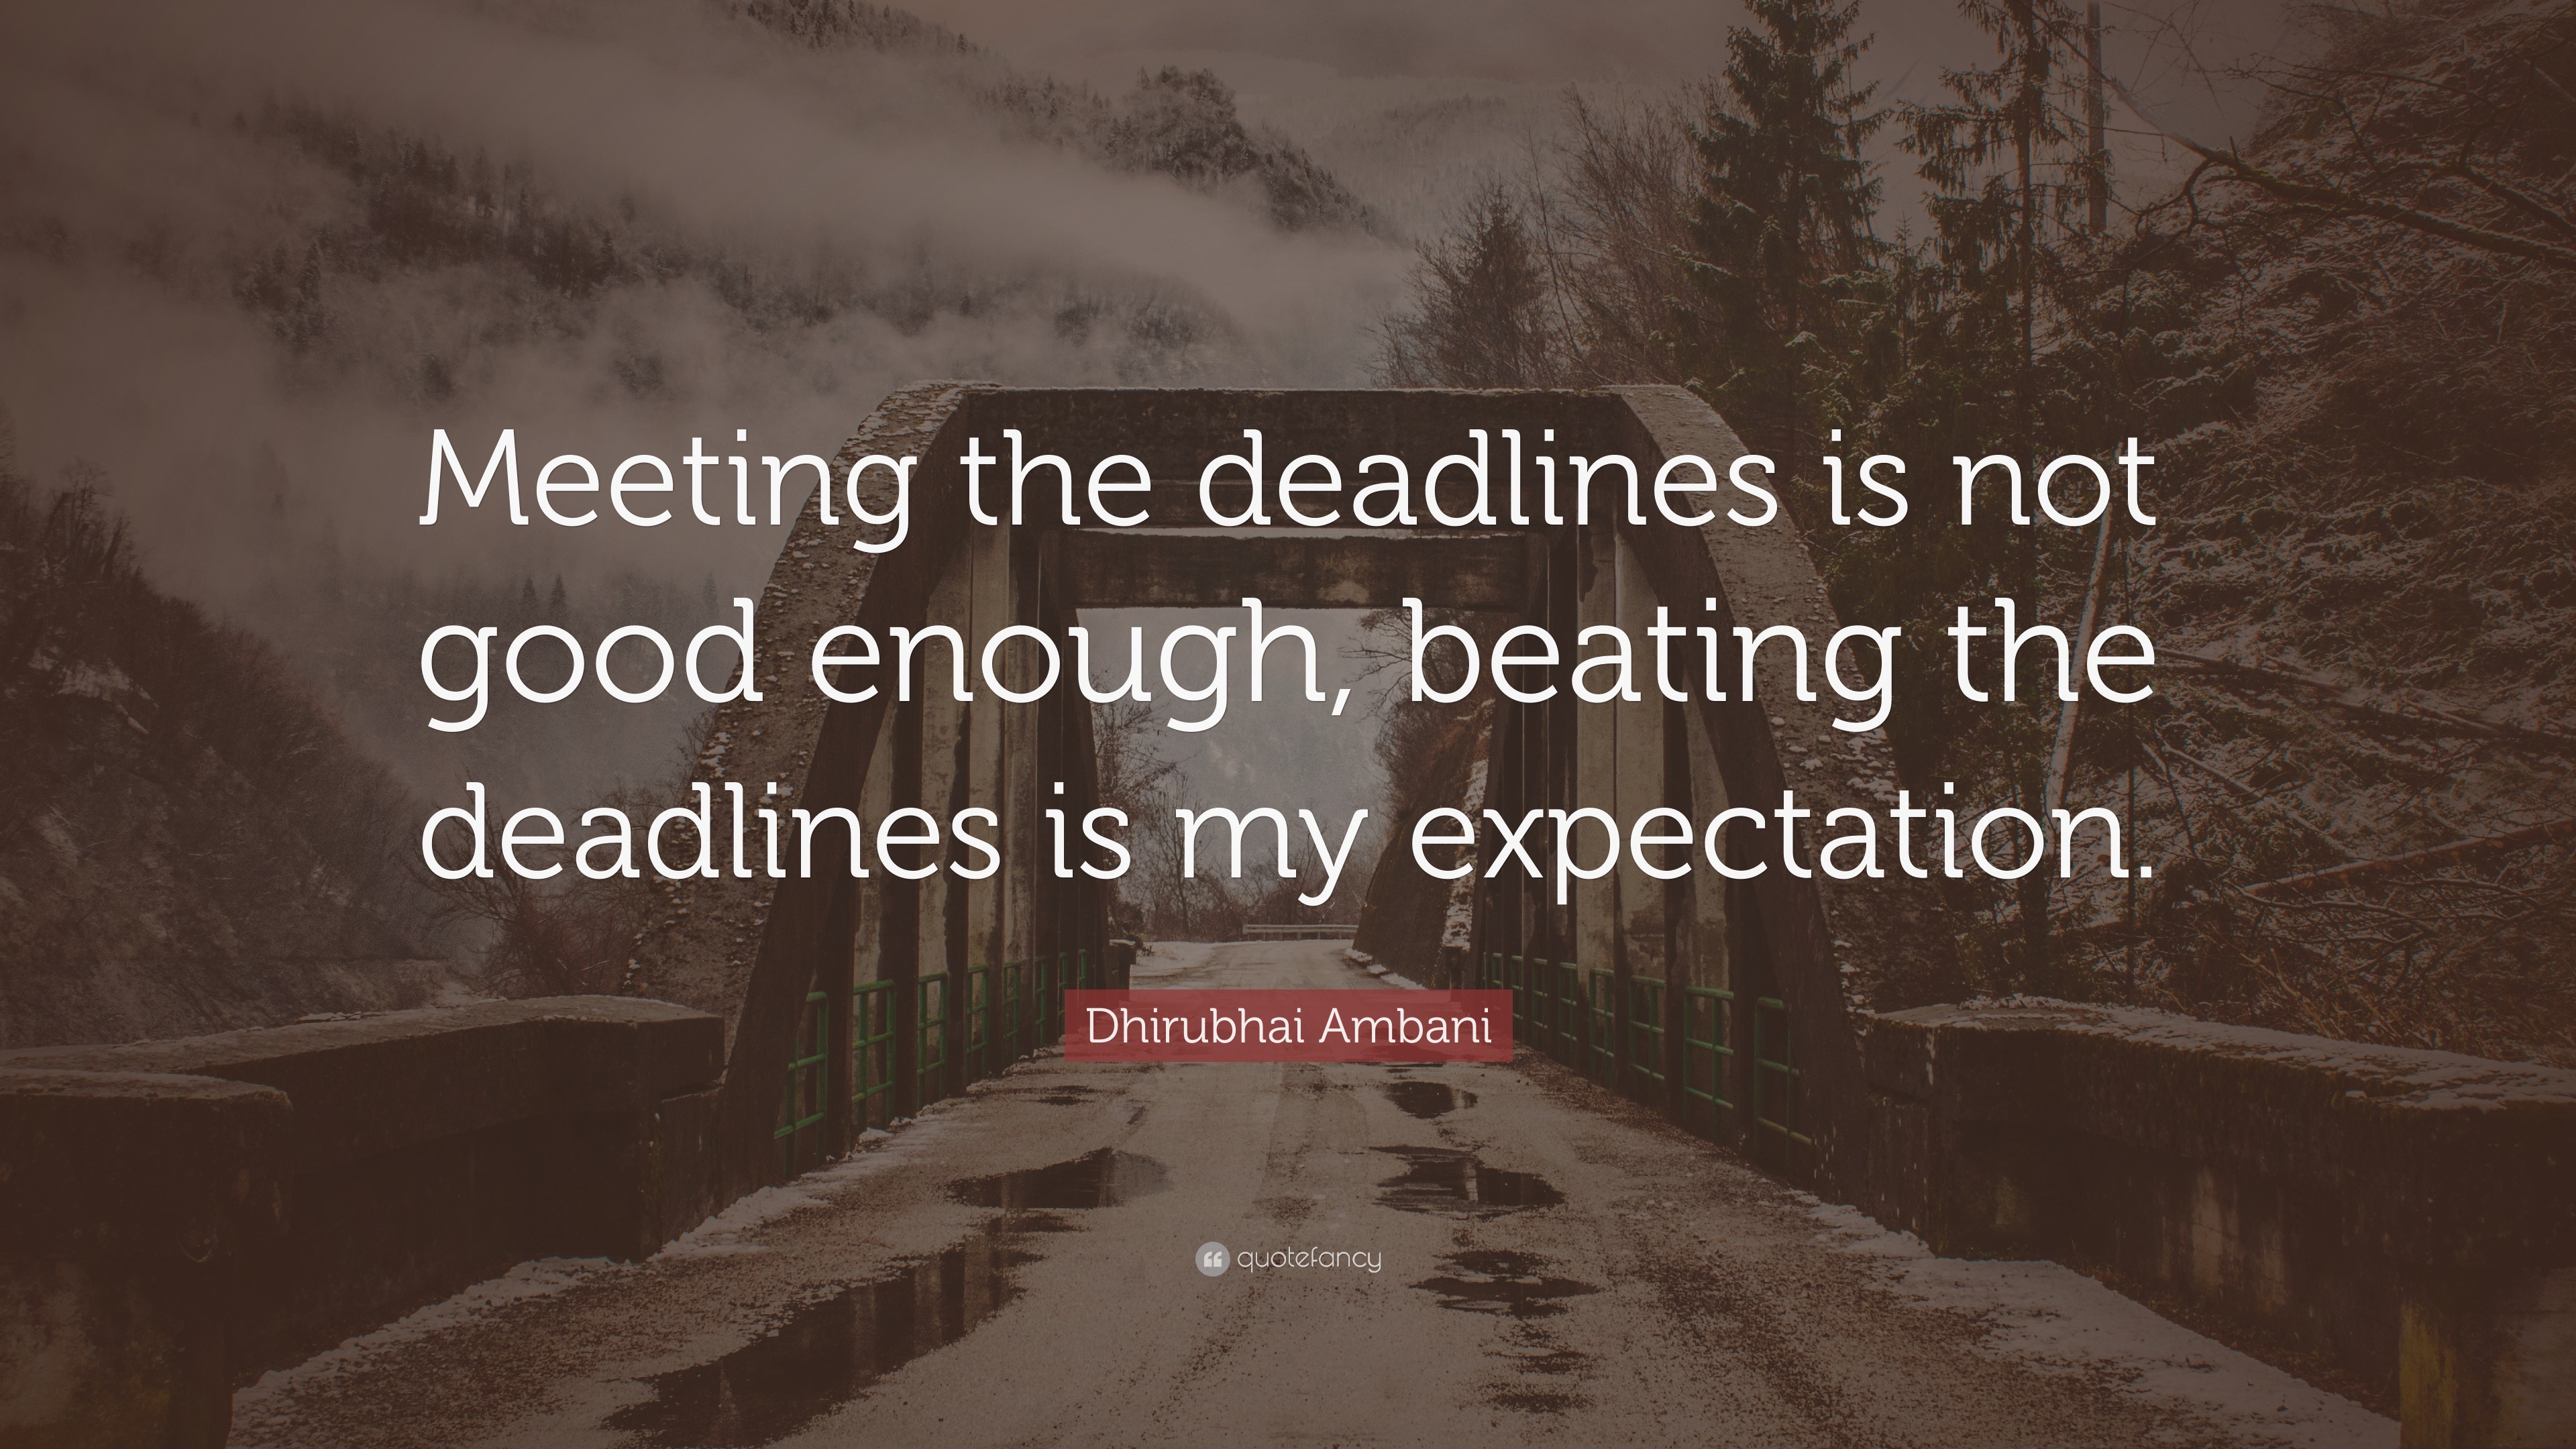 Dhirubhai Ambani Quote: “Meeting the deadlines is not good enough